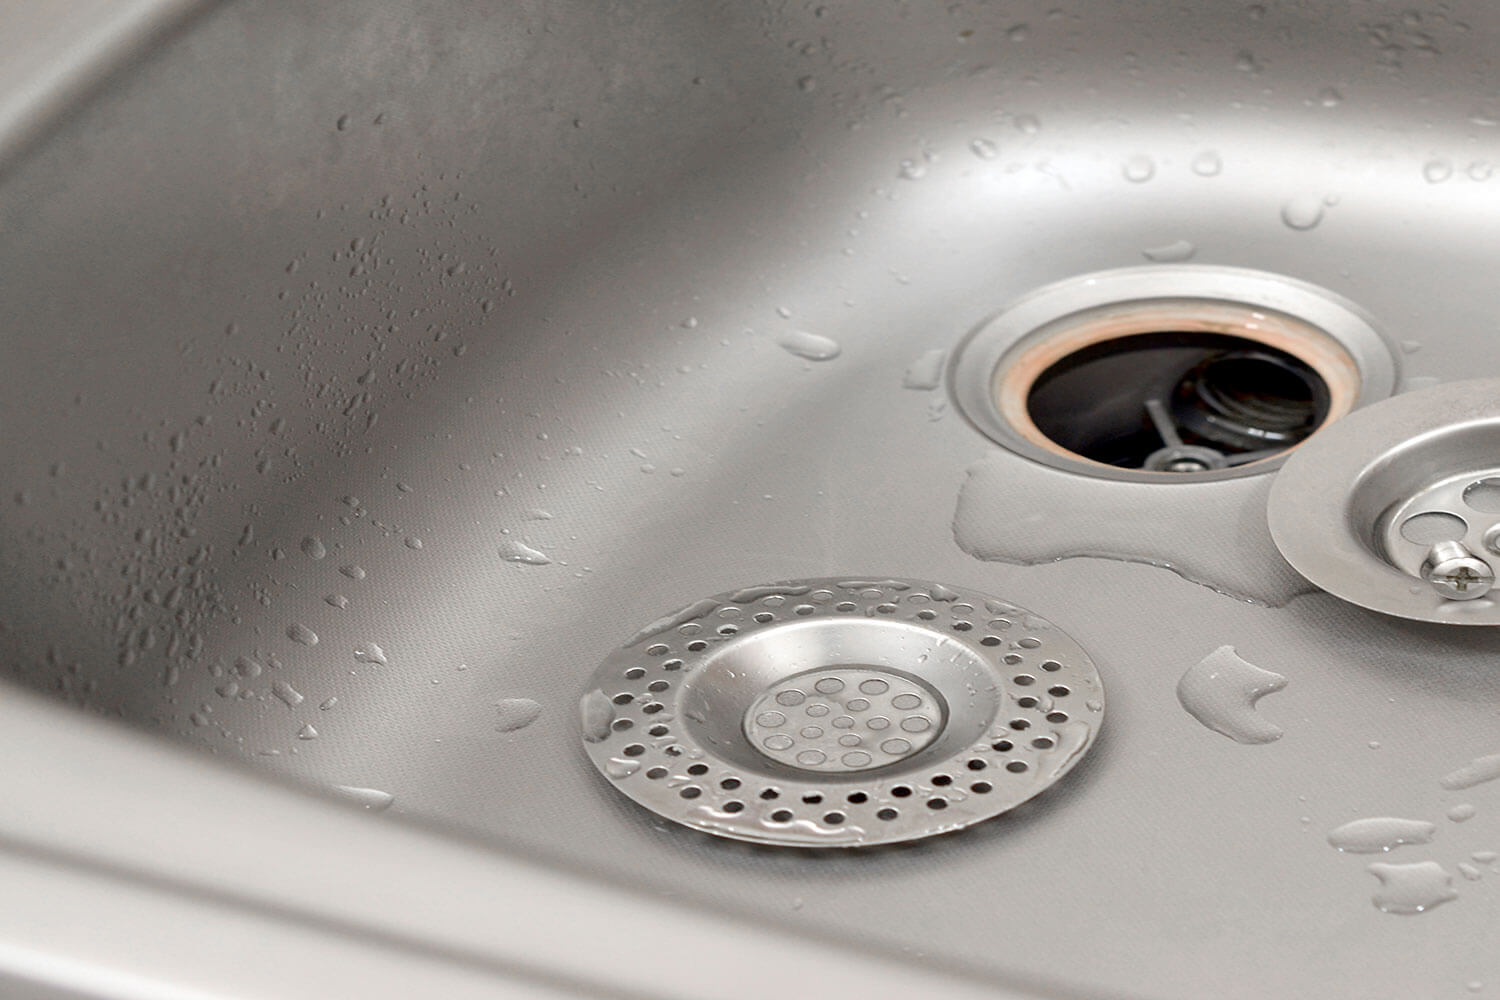 Drain Cleaning Halifax Plumbing Experts